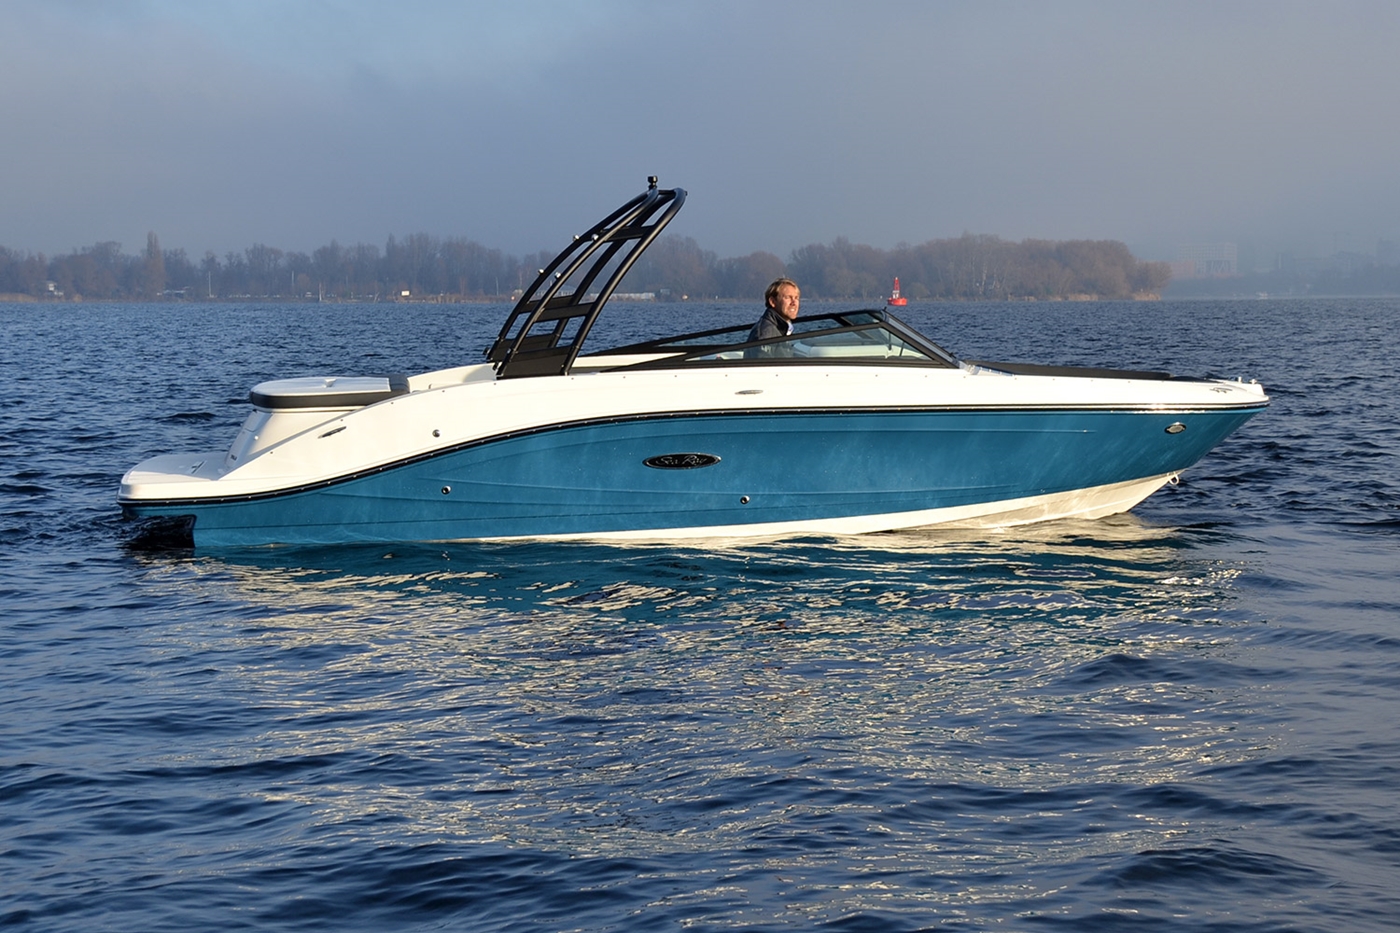 Sea Ray 230 SPX: Prices, Specs, Reviews and Sales Information - itBoat